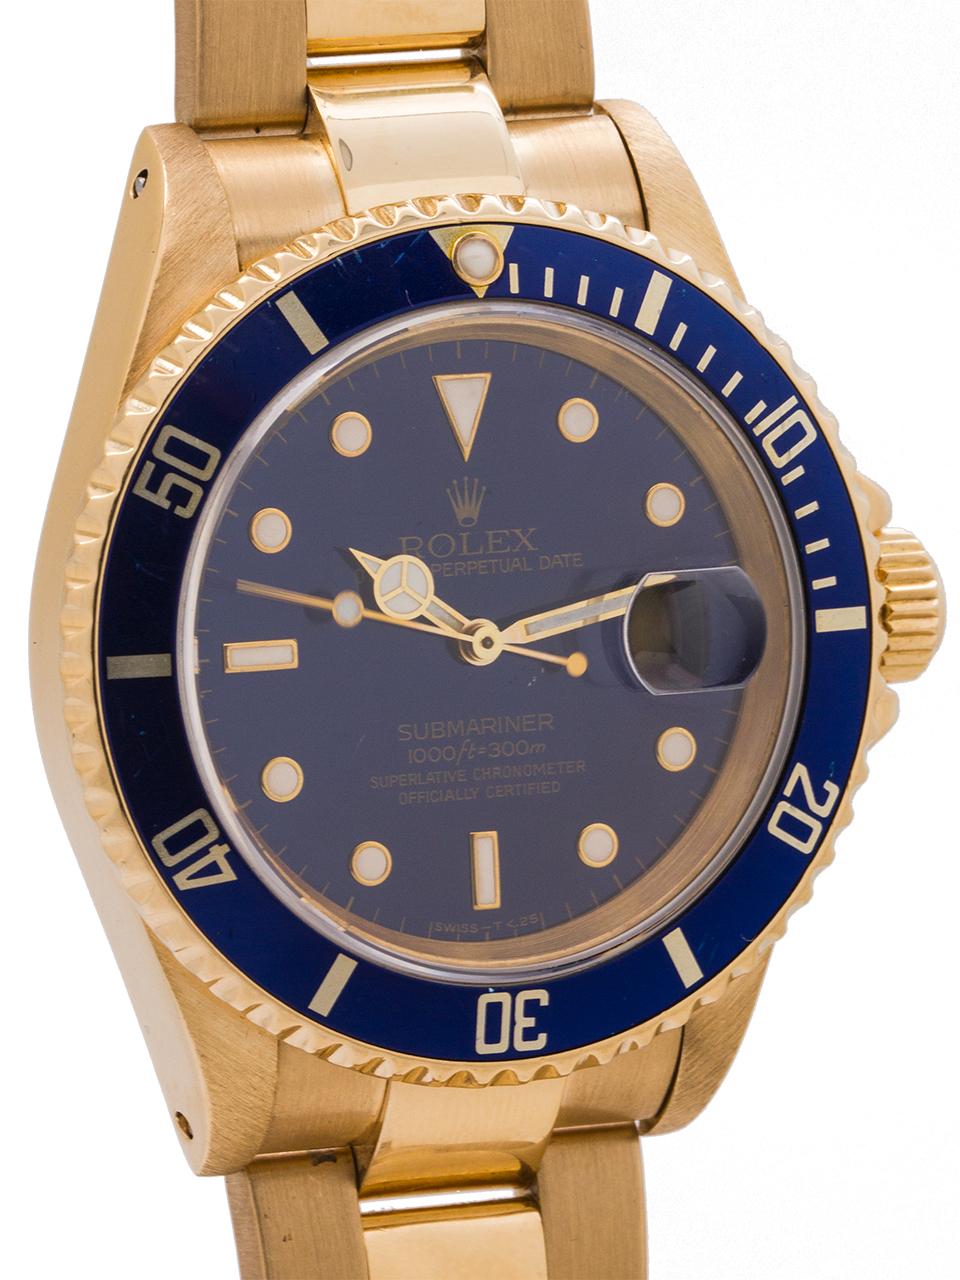 
A very fine condition example of the classic, now discontinued, Rolex 18K gold Submariner ref # 16618 serial# E6 circa 1990. Featuring a 40mm diameter case with unidirectional black elapsed time bezel, sapphire crystal, beautiful condition original